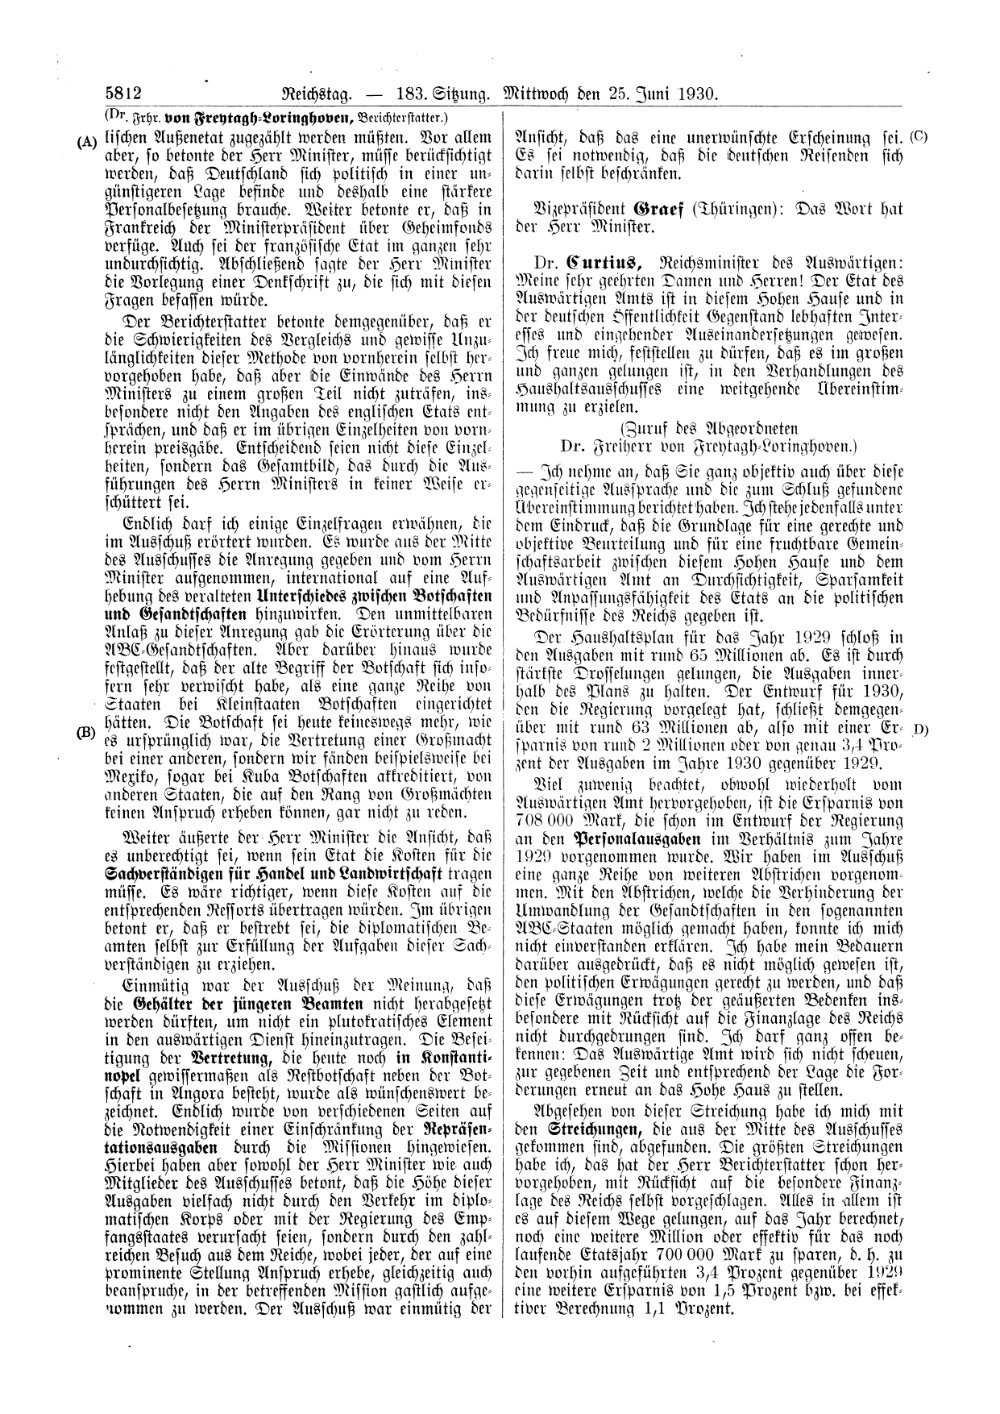 Scan of page 5812